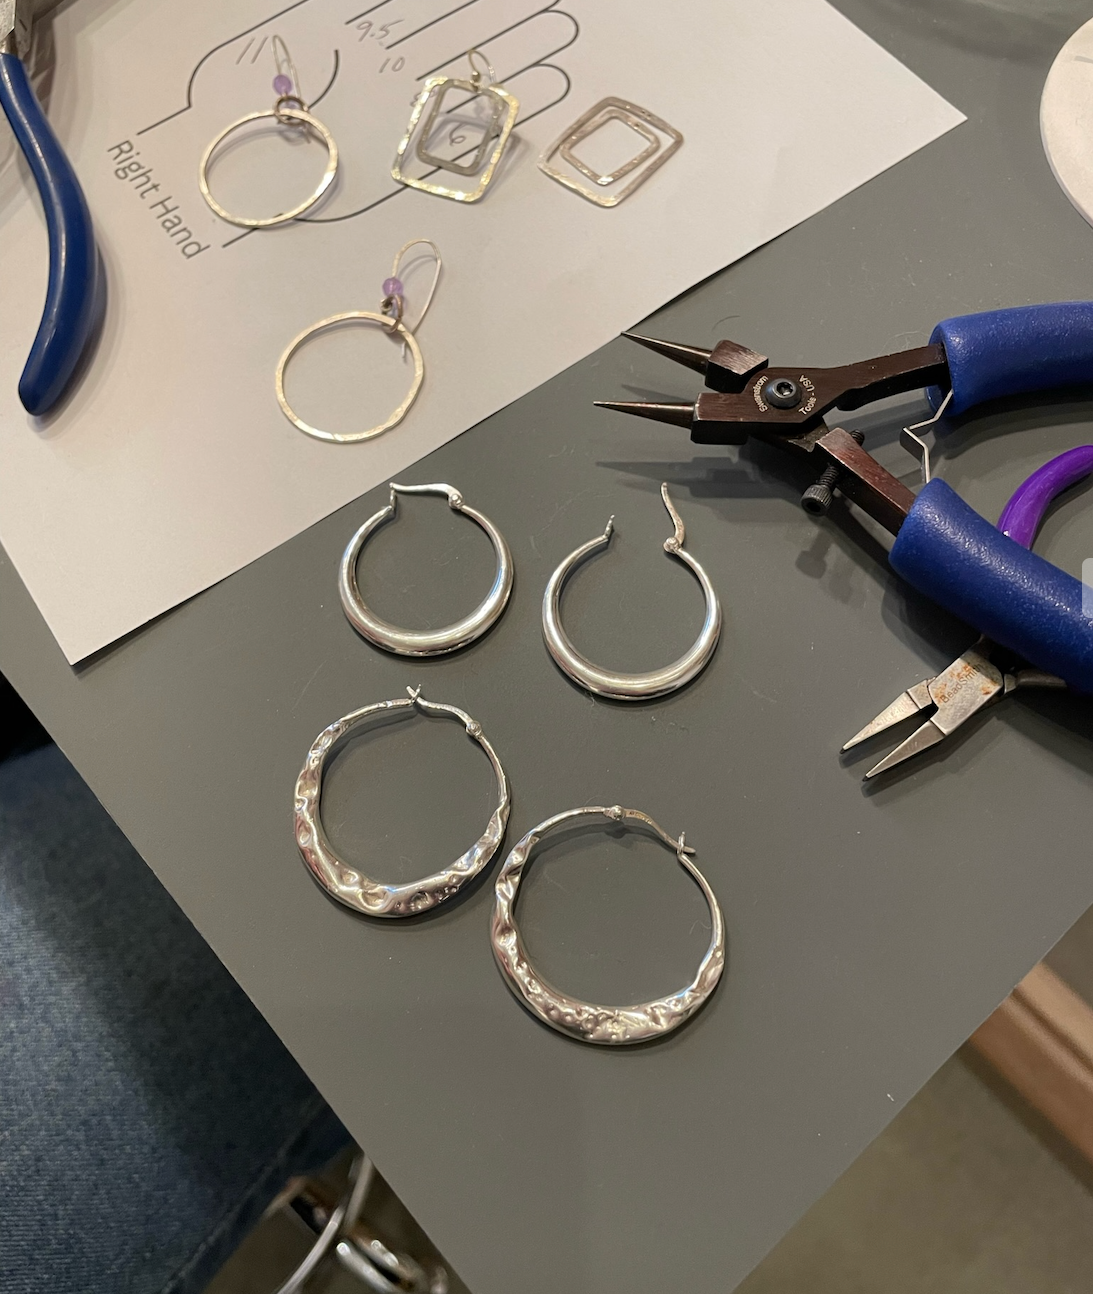 Jewelry Care & Repair - Thursday October 19, 6:30-8:30pm @WEND